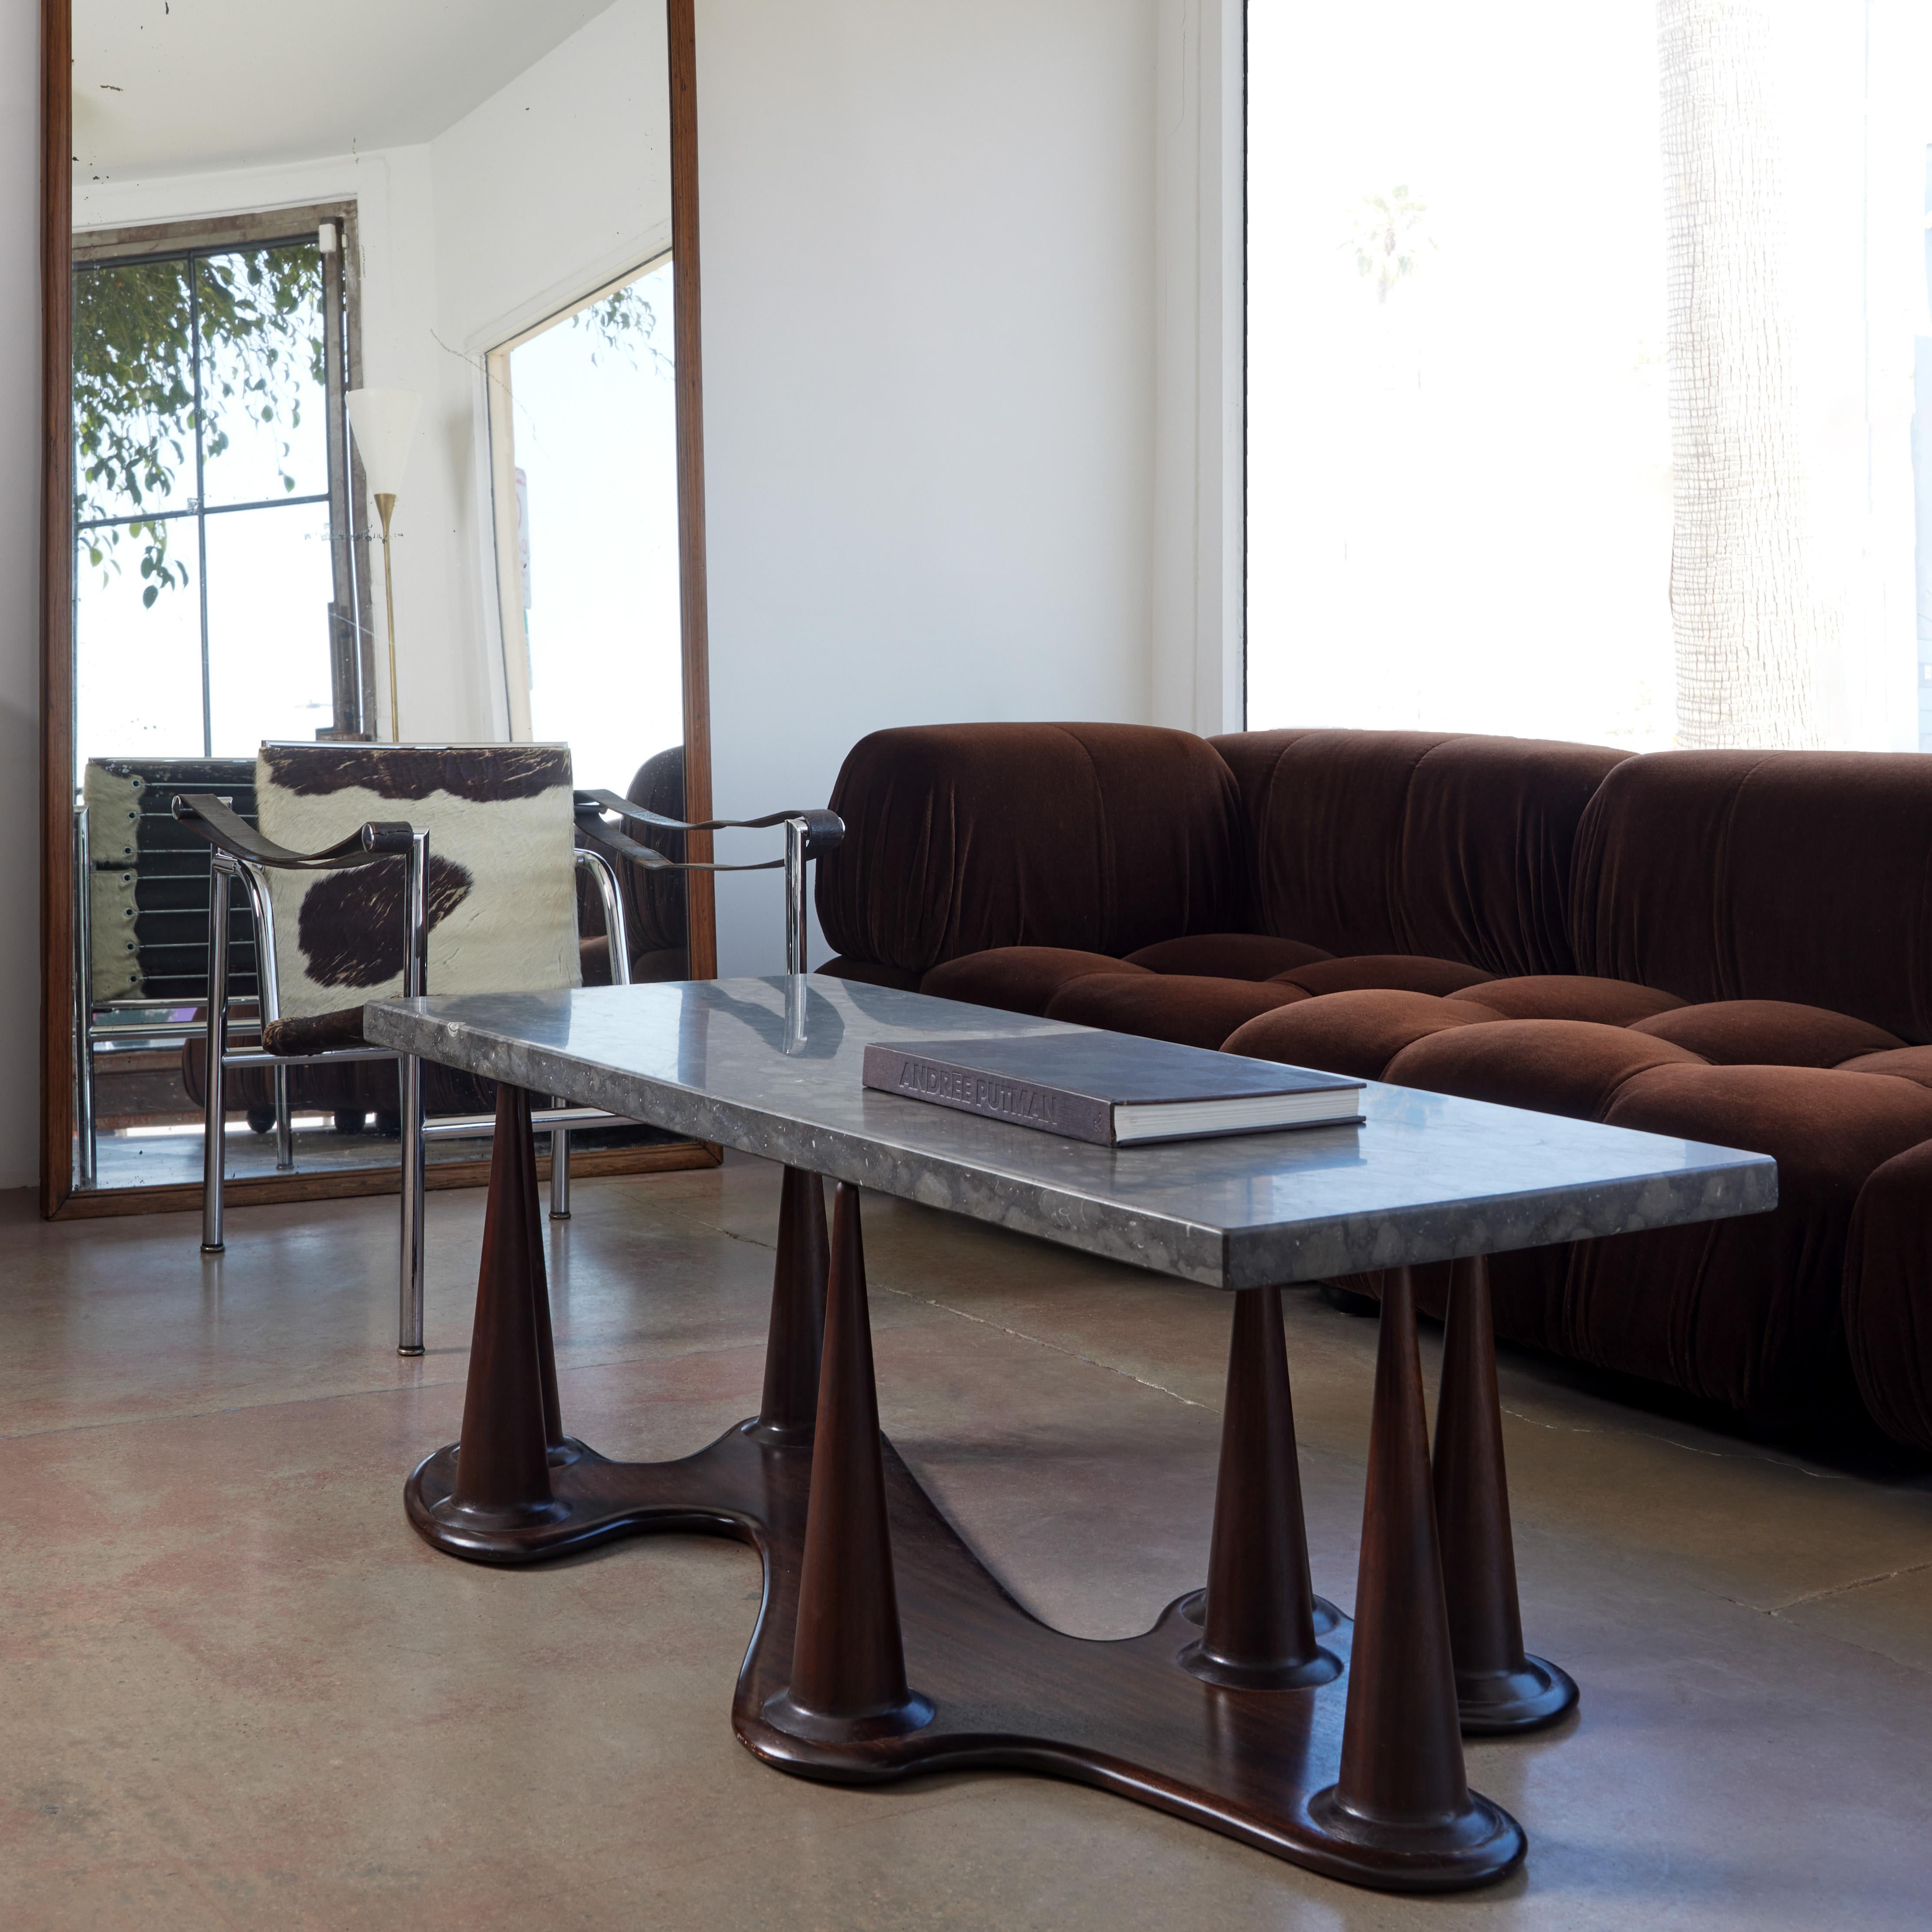 A unique coffee table with a sculptural mahogany base and rectangular fossilized marble top. Designed and made 1956 by Torsten Grundberg, Sweden.

Provenance: Designed in 1956 for Stockholm City Hall, Sweden.